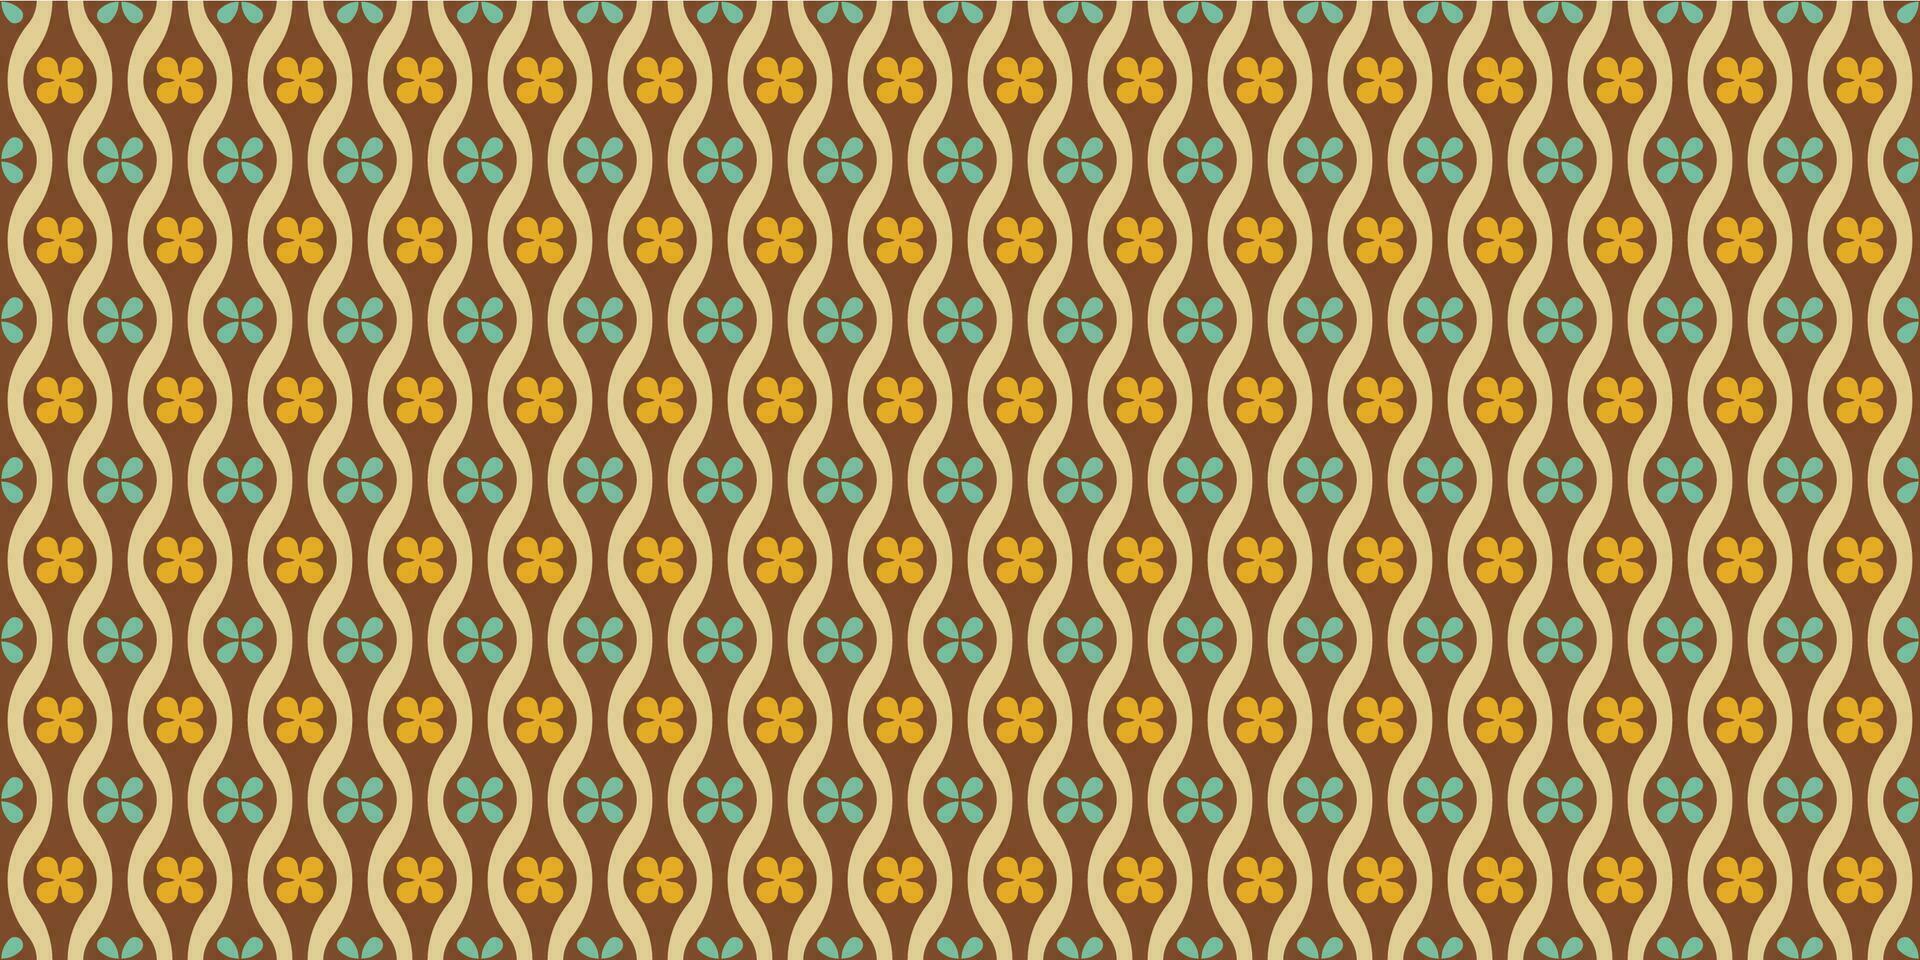 A retro style seamless pattern with a abstract design and striped vector background. Print surface for textiles, wrapping, and webs.